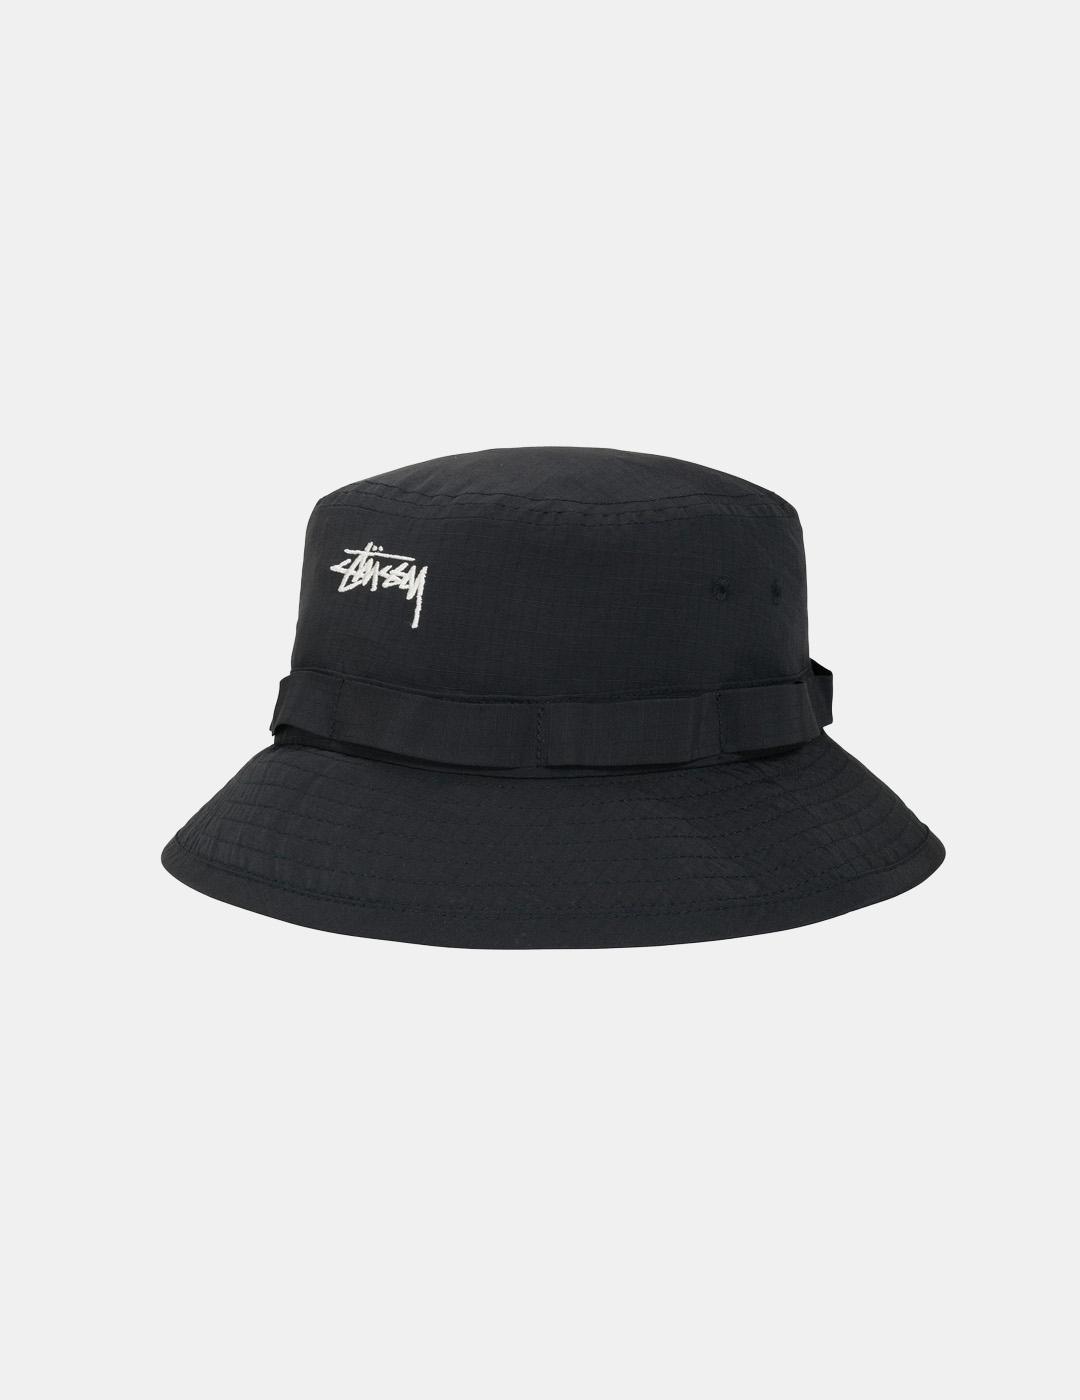 Bucket Stussy Nyco Ripstop Boonie